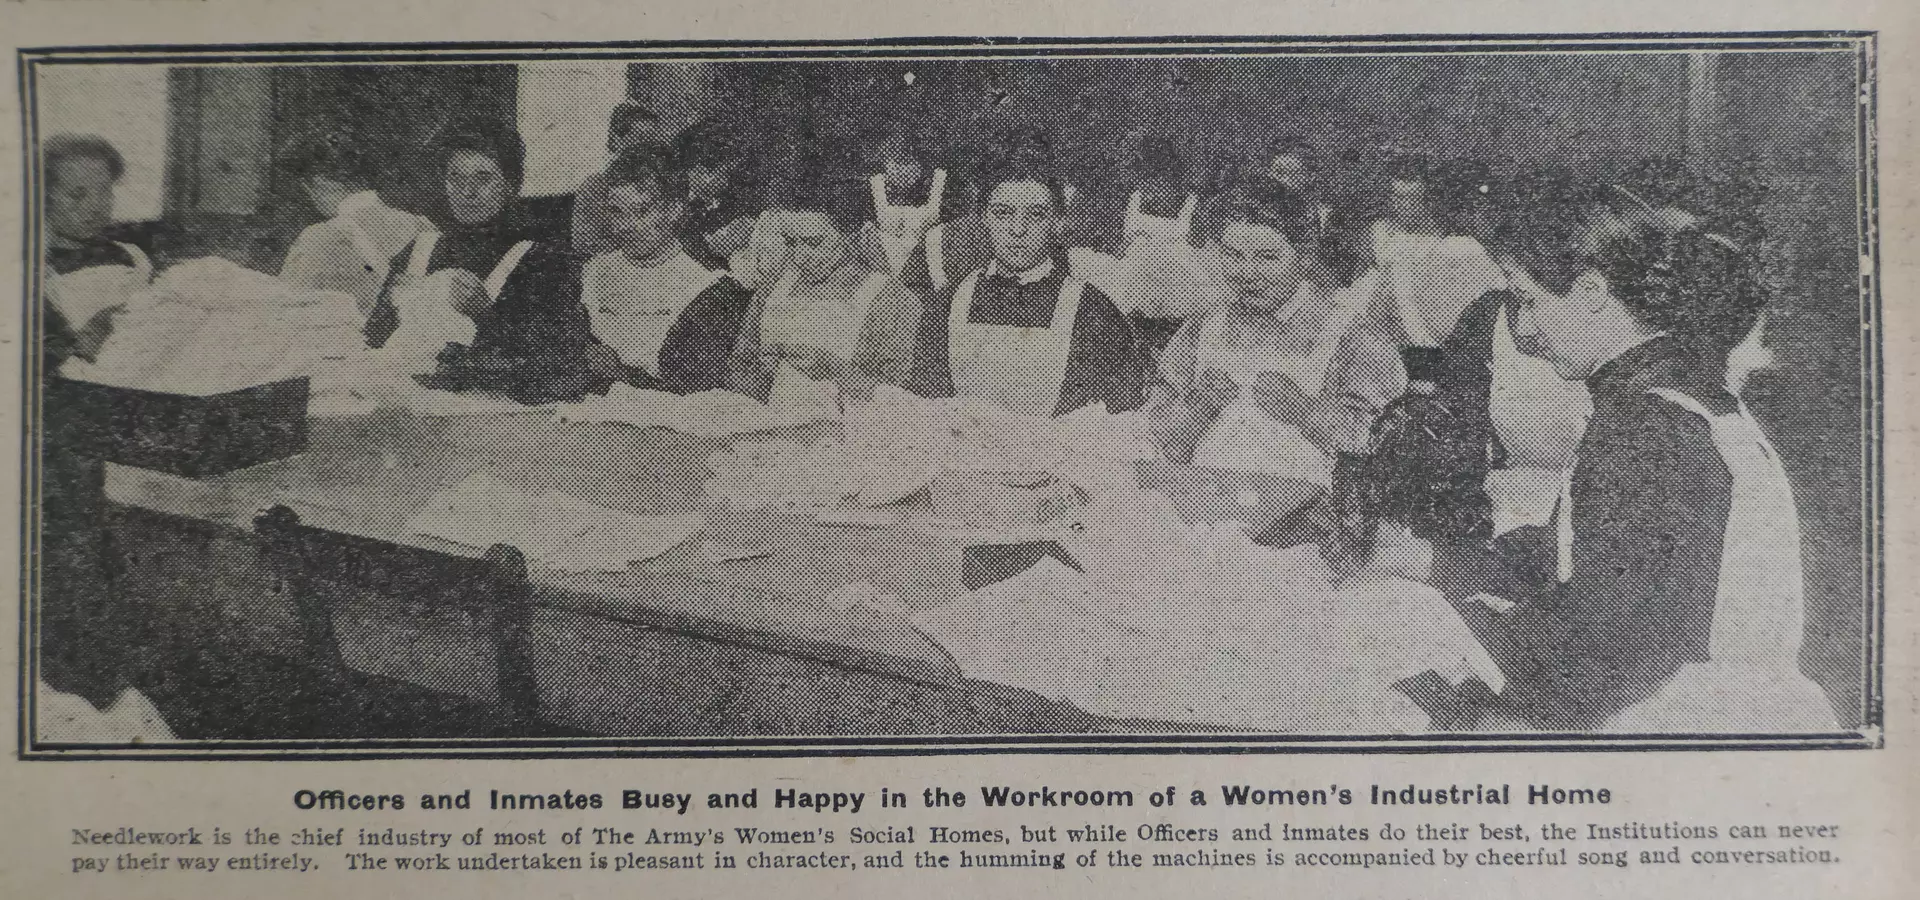 An image of a Salvation Army industrial home workroom, showing women sewing and embroidering